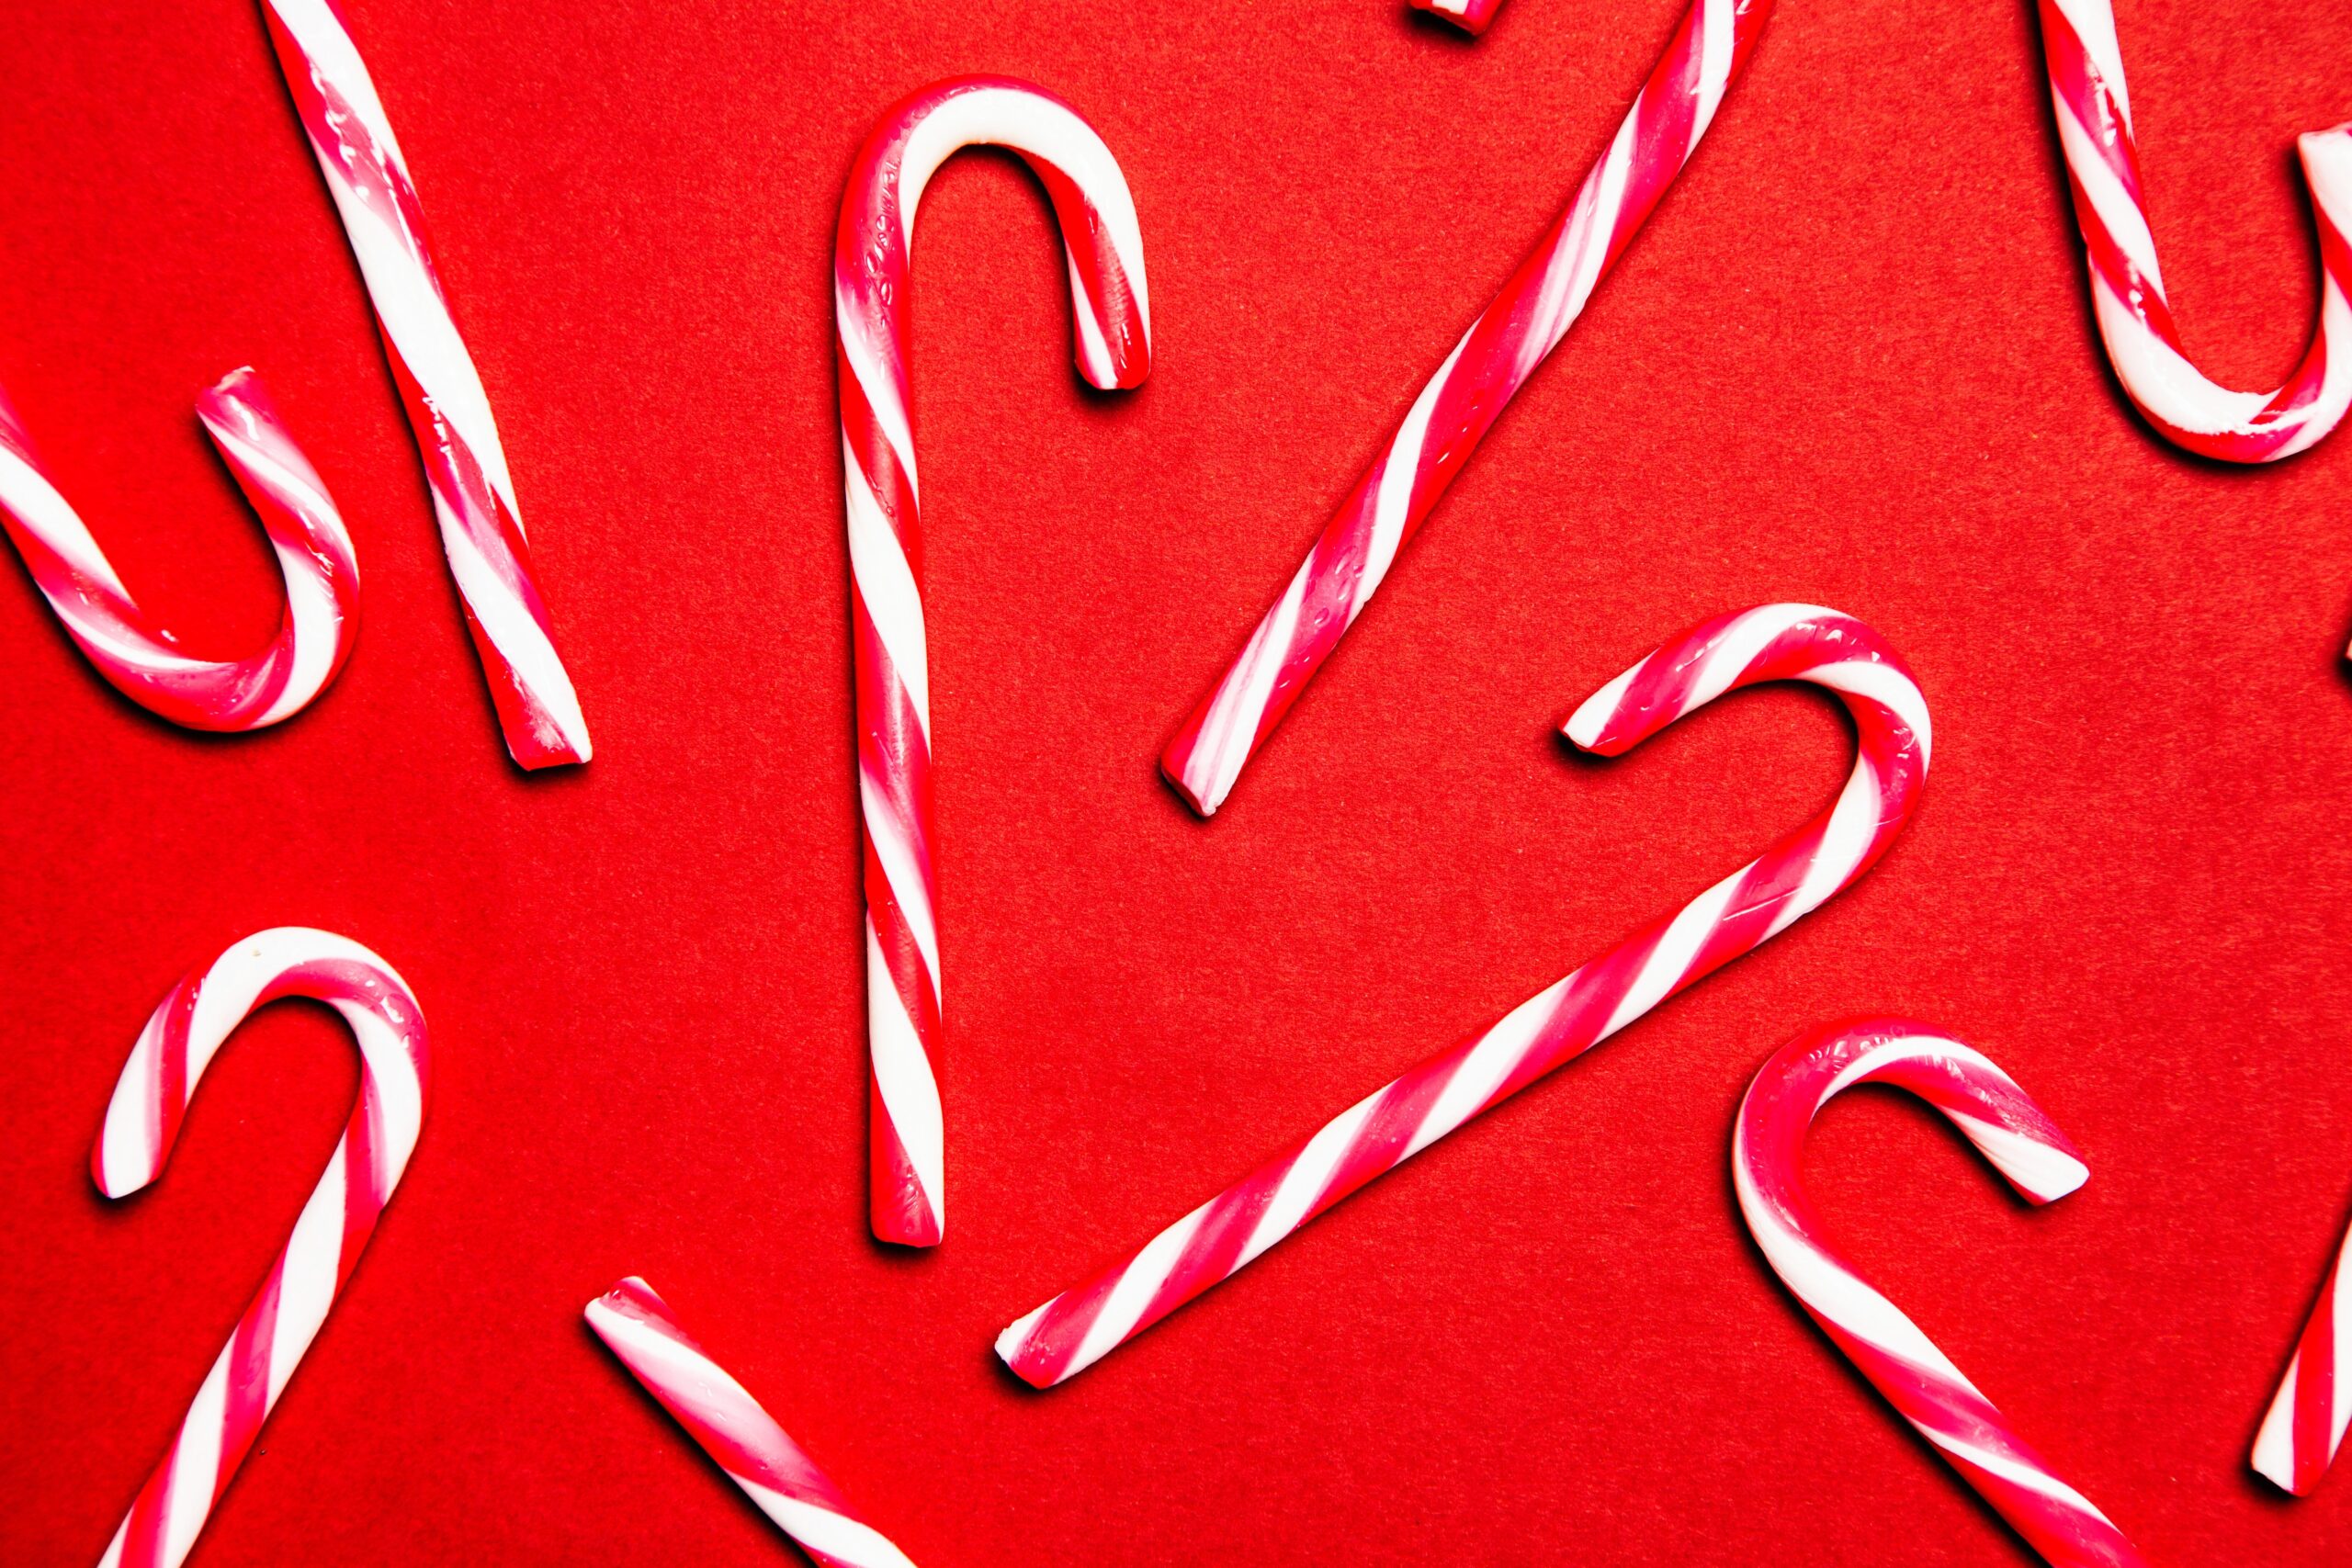 Red and white candy canes on a red background